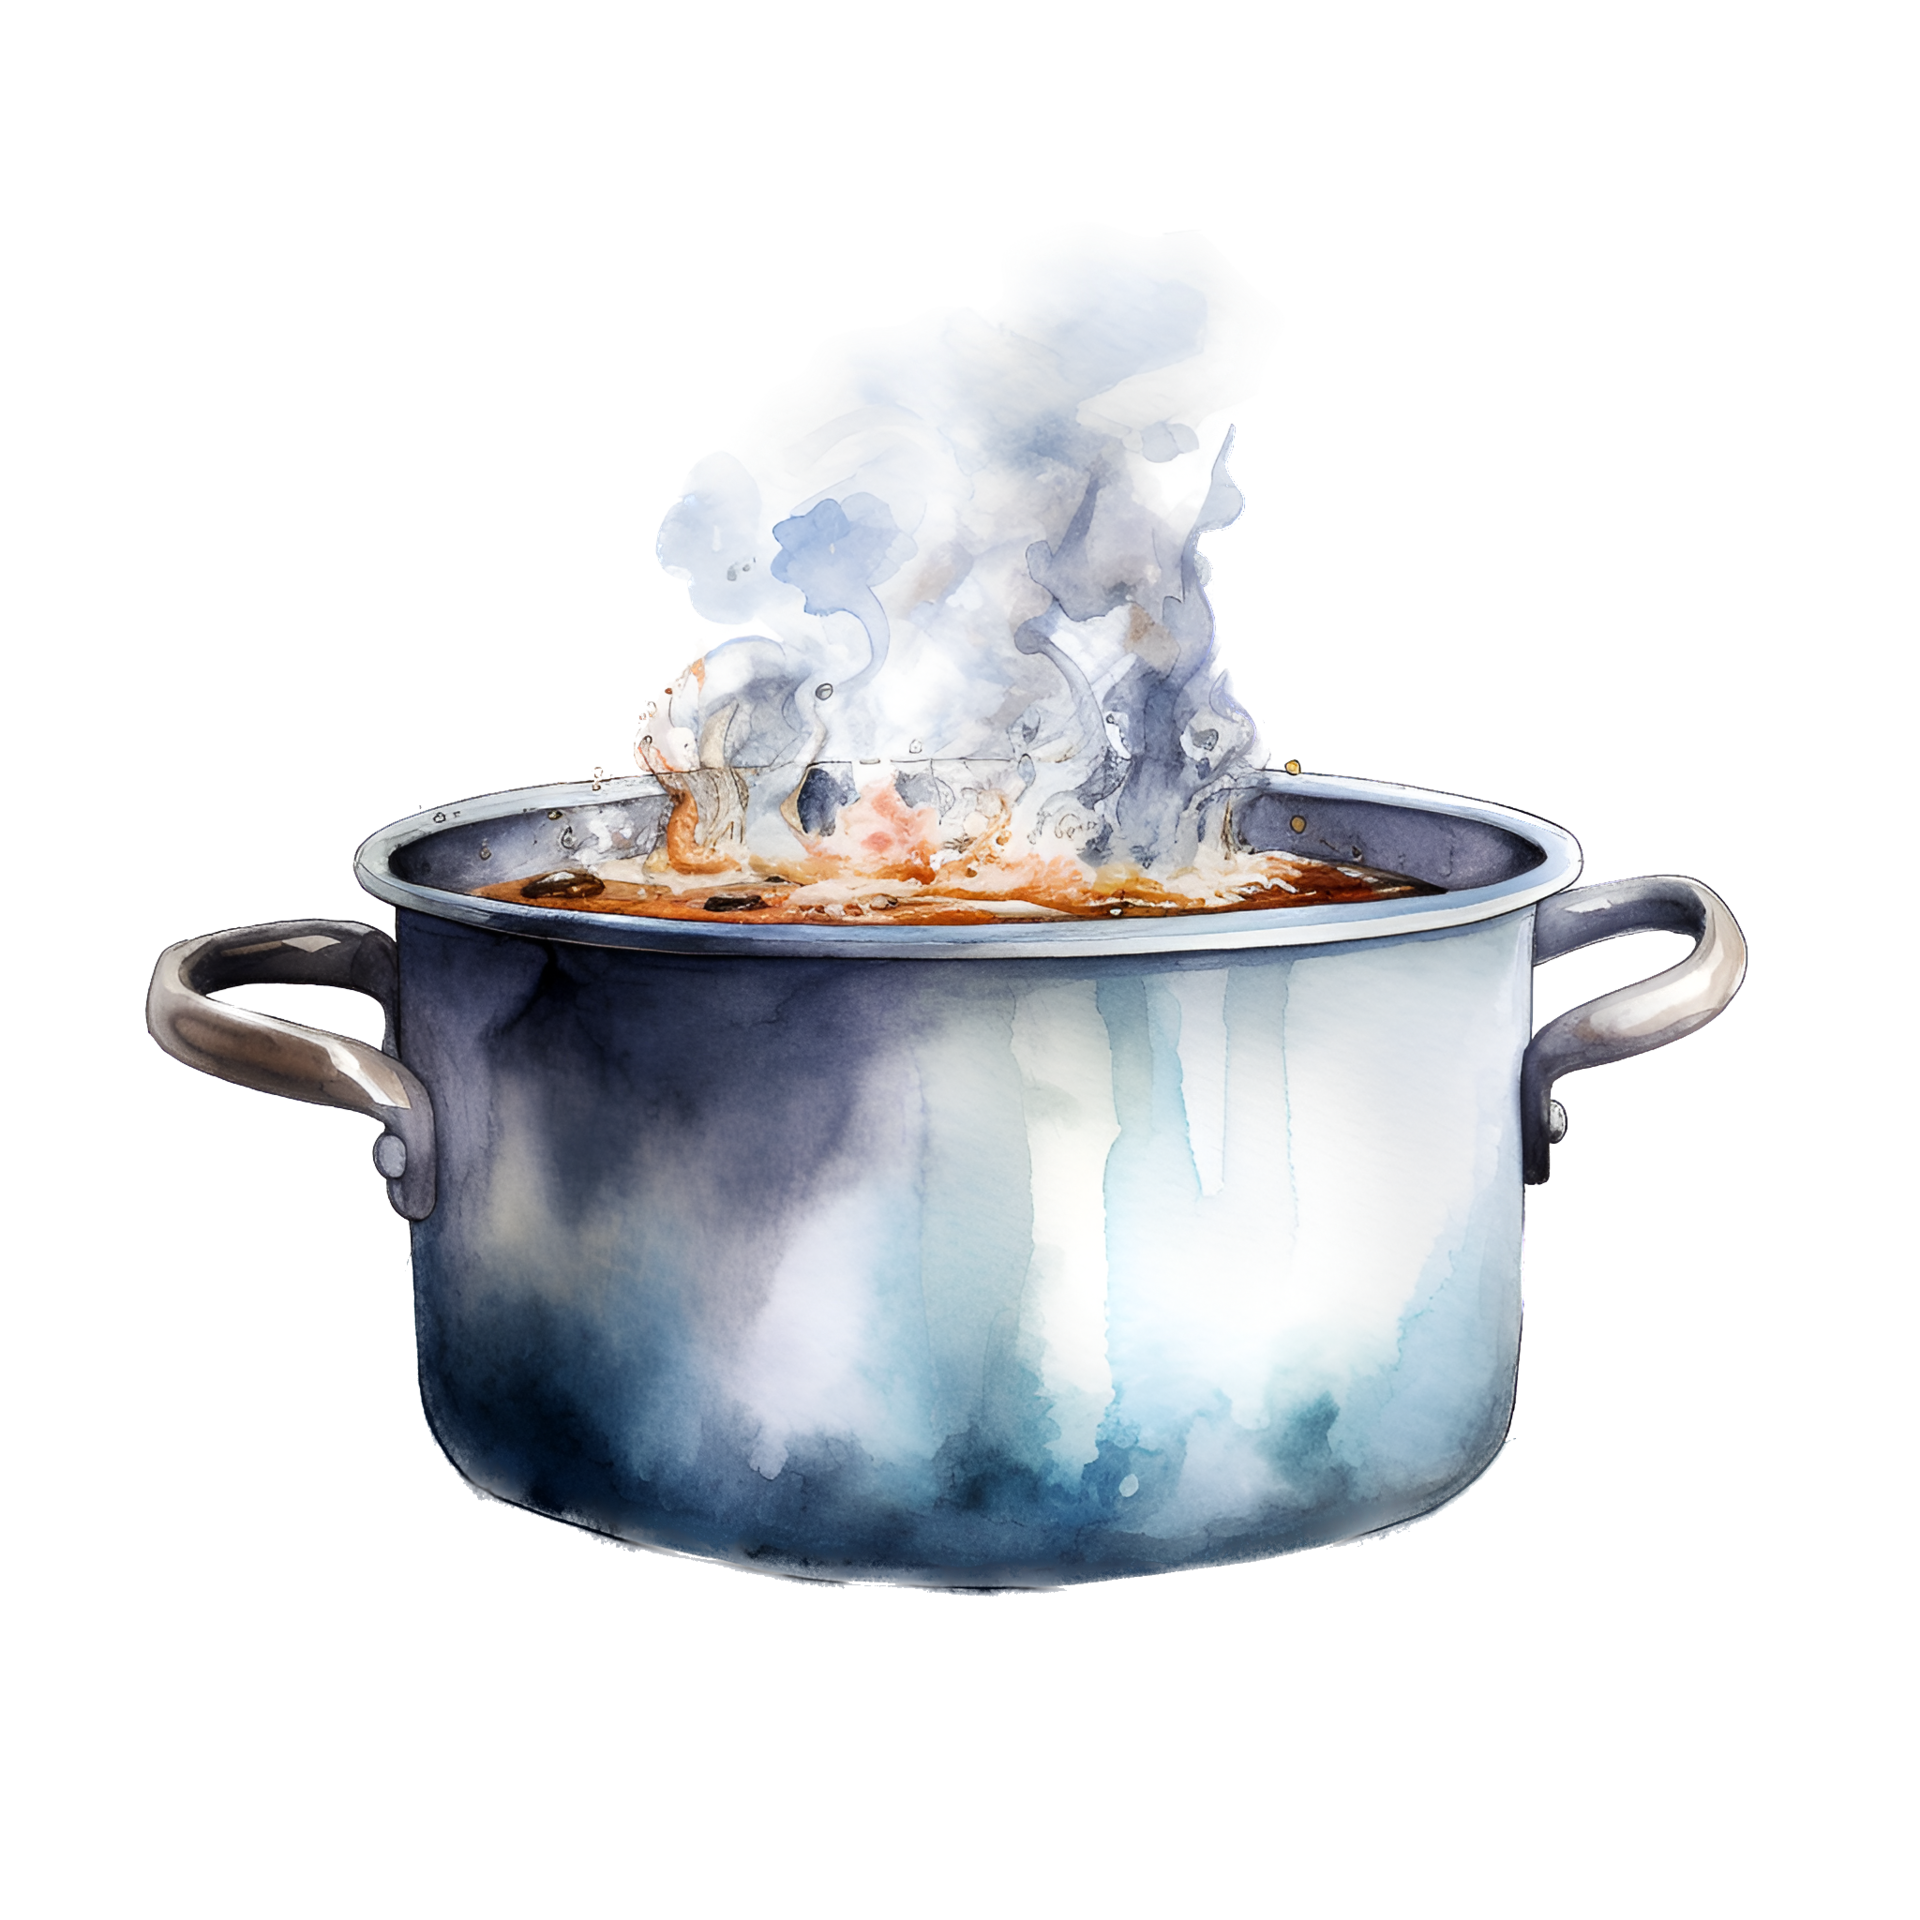 56,479 Boiling Pot Water Royalty-Free Images, Stock Photos